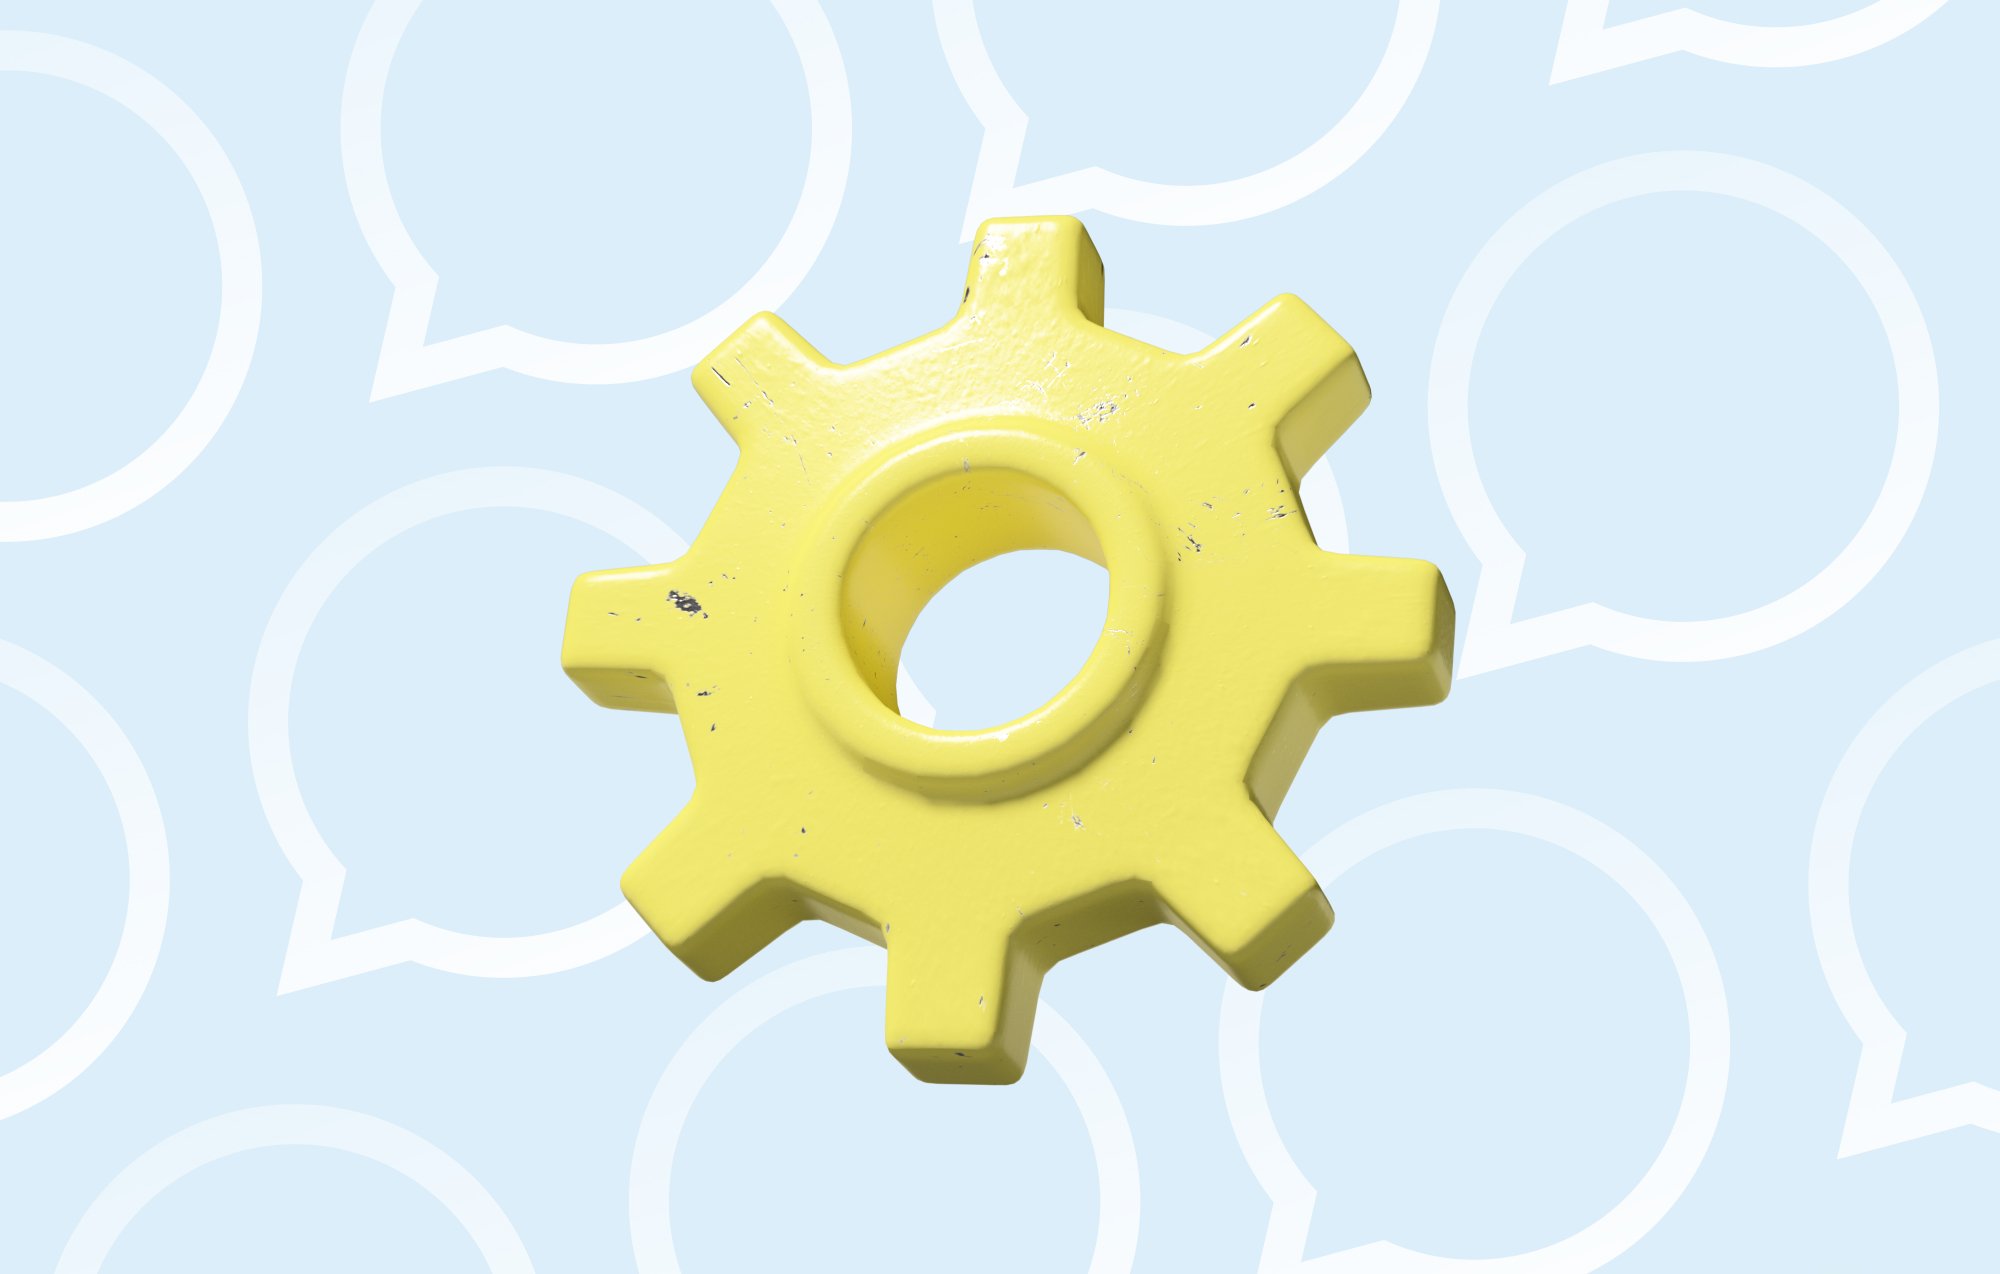 Yellow cog representing software for WhatsApp software blog article by charles